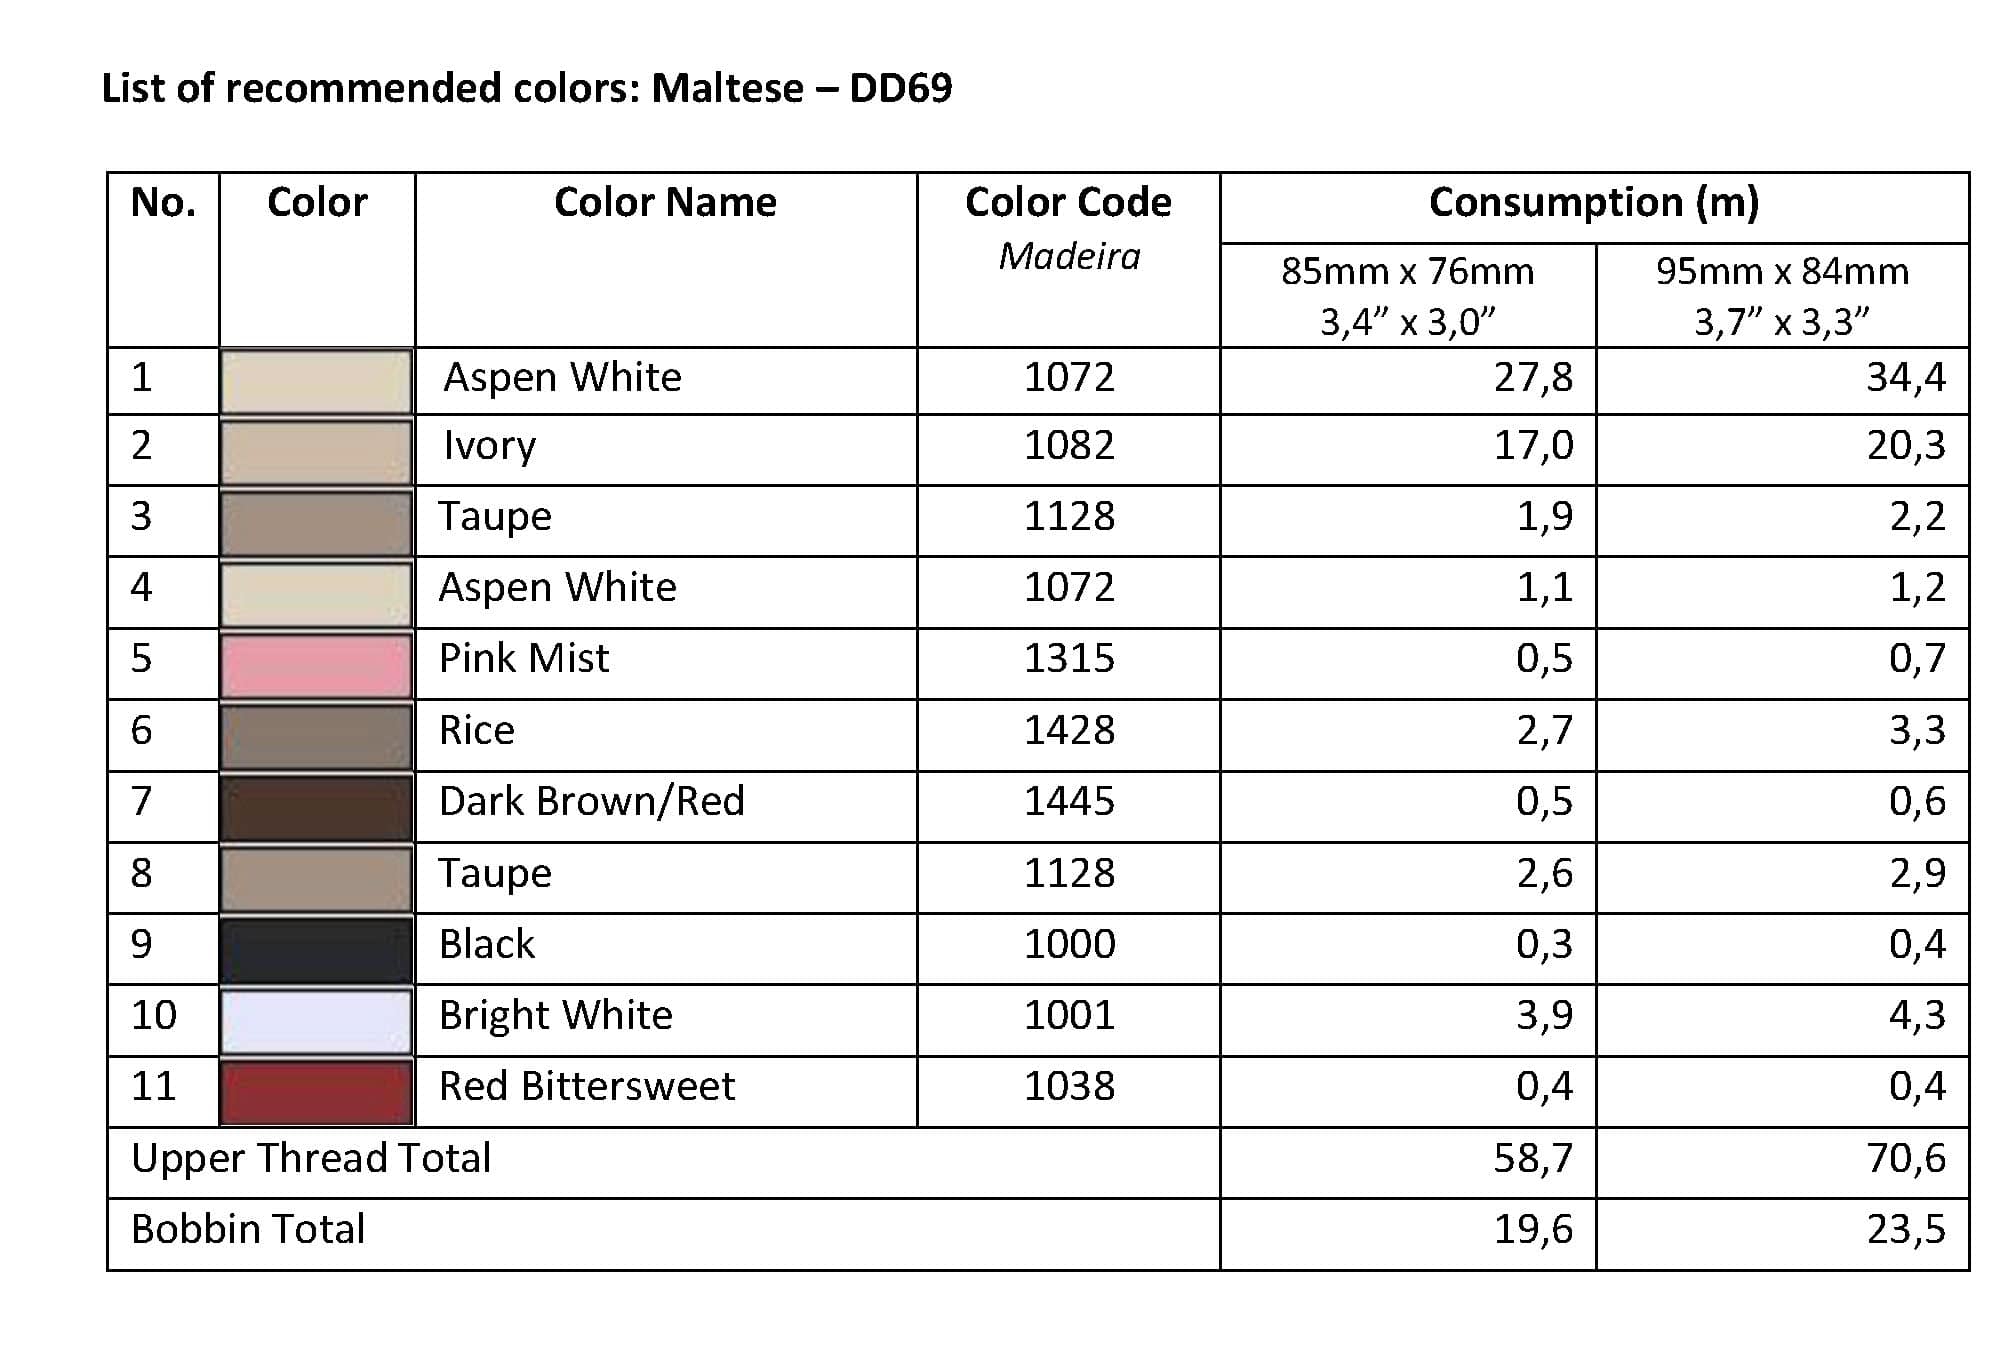 List of Recommended Colors - Maltese DD69